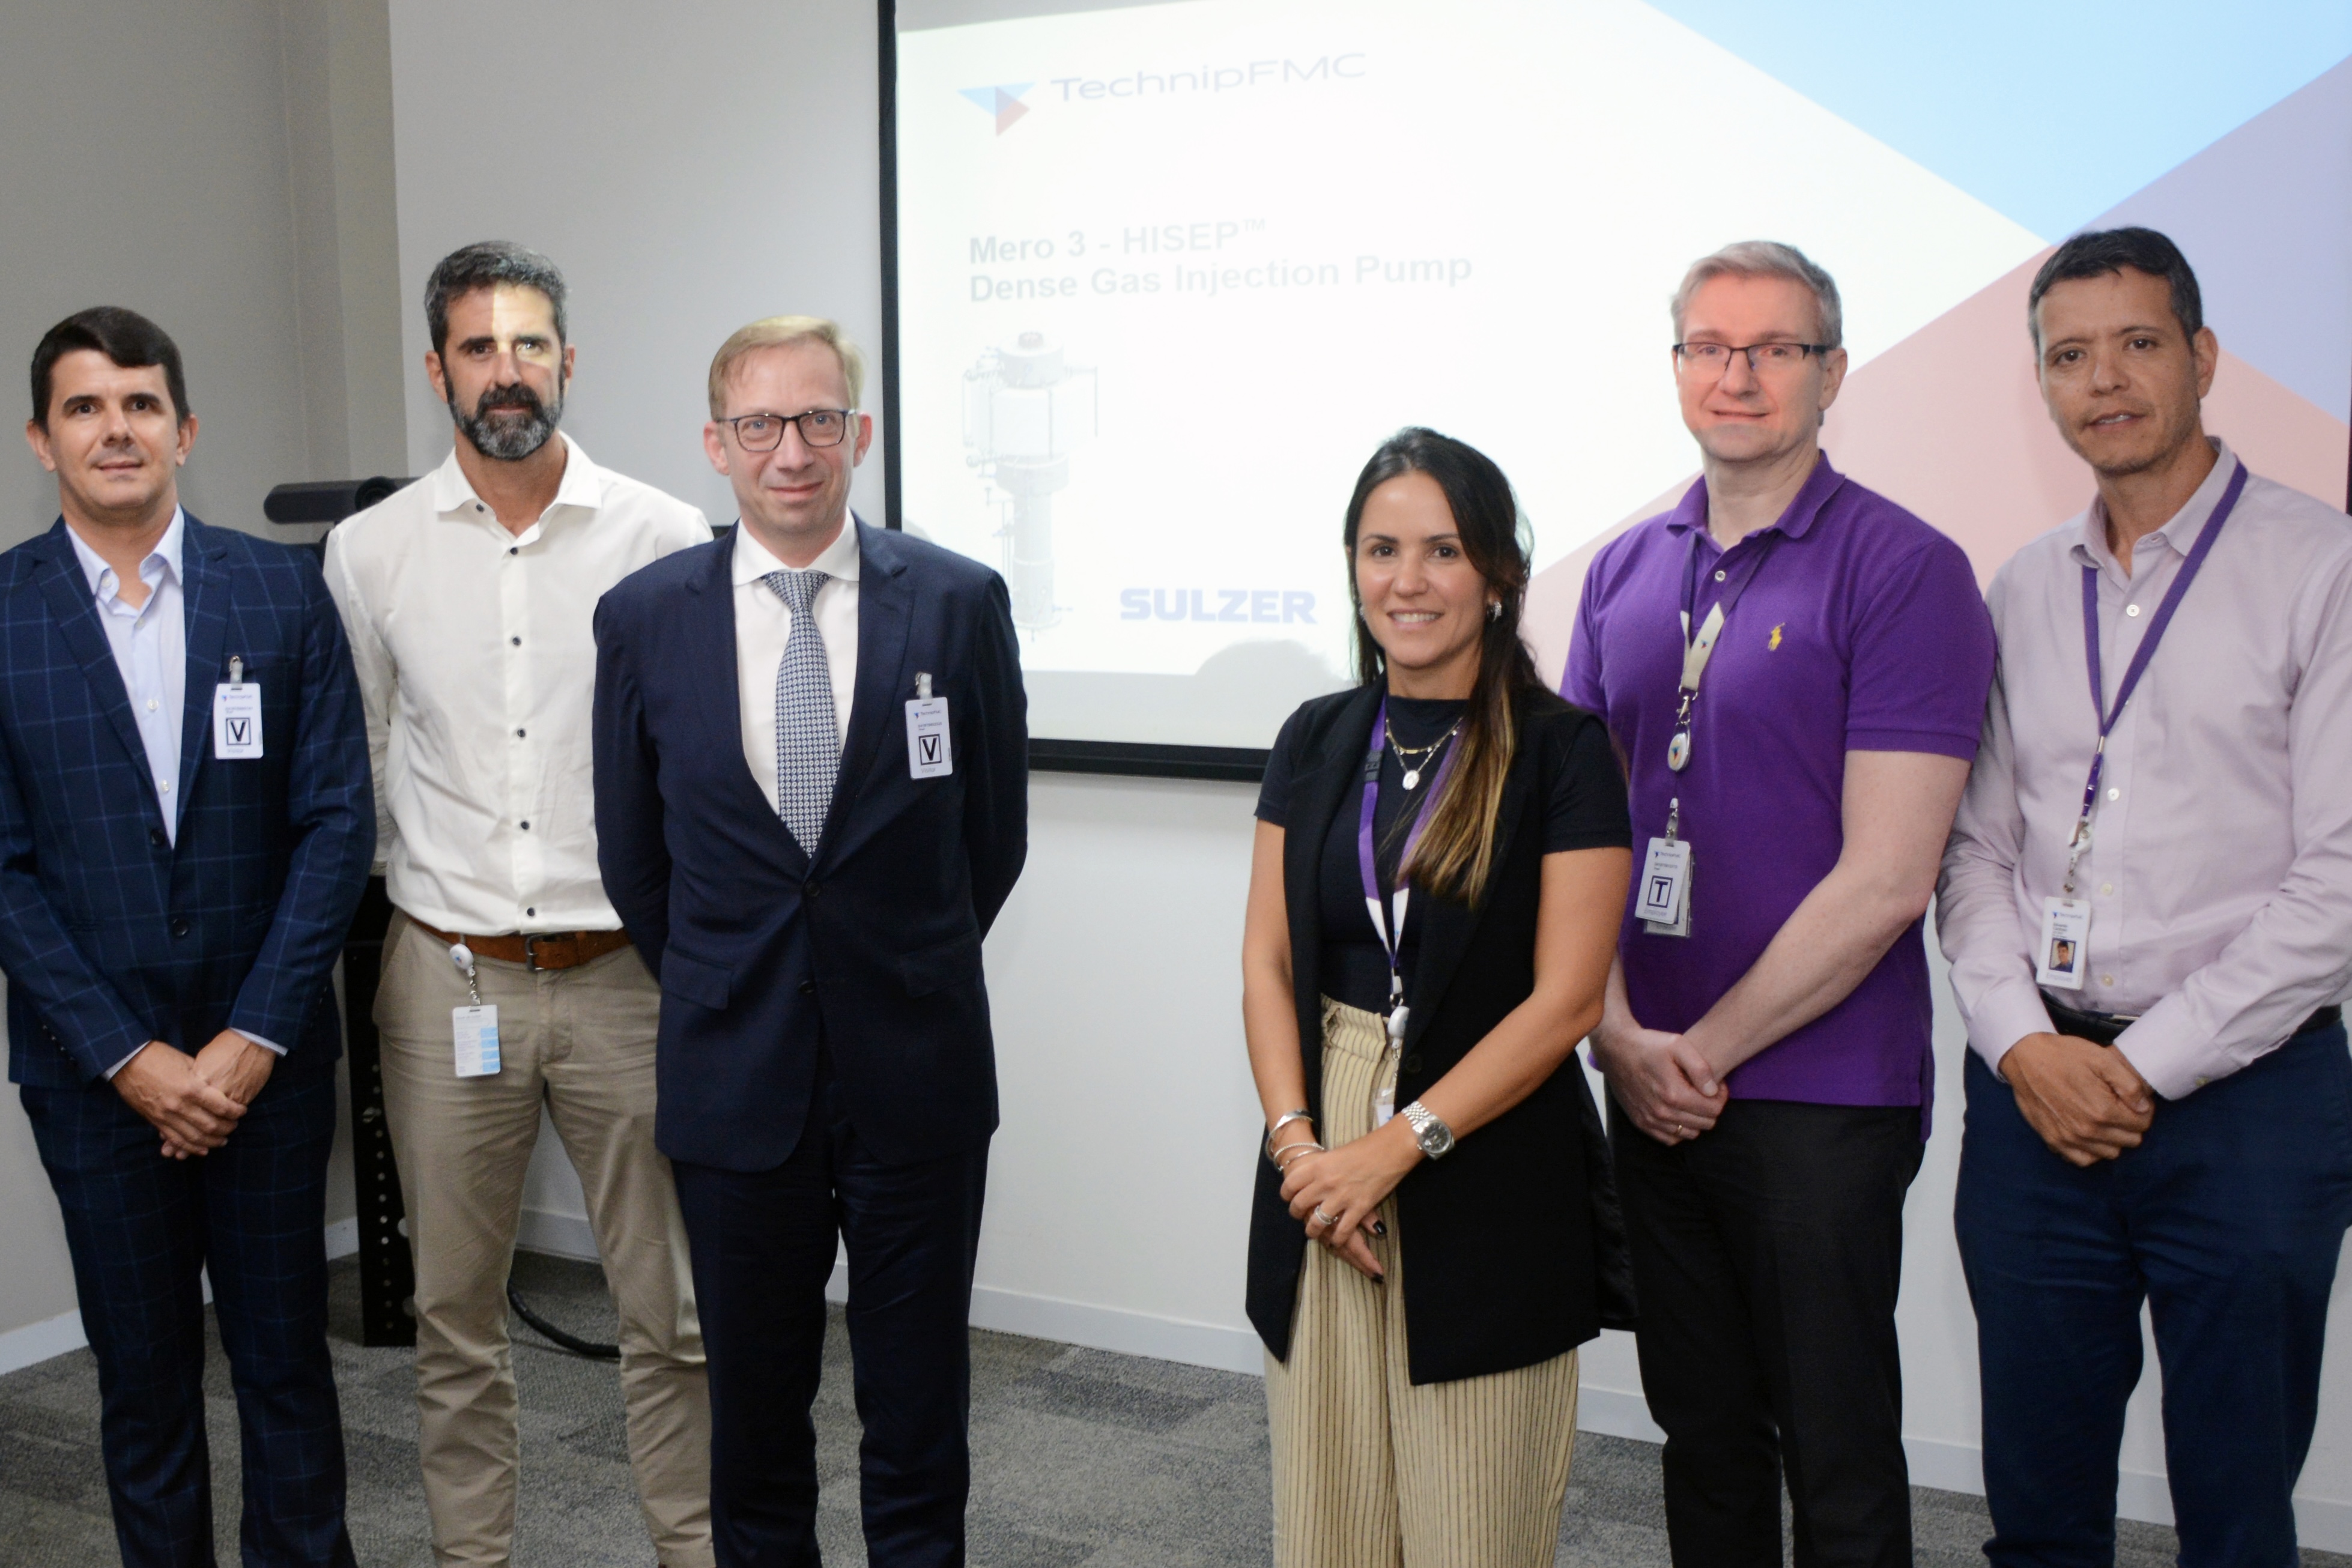 Jonathan Lloyd: Head of the Flow Equipment Energy and Infrastructure Business Unit at Sulzer (middle) and Bruno Hass Antoniassi: Sr. Sales Manager, Brazil and Mercosur at Sulzer (left) meet with key TechnipFMC stakeholders.